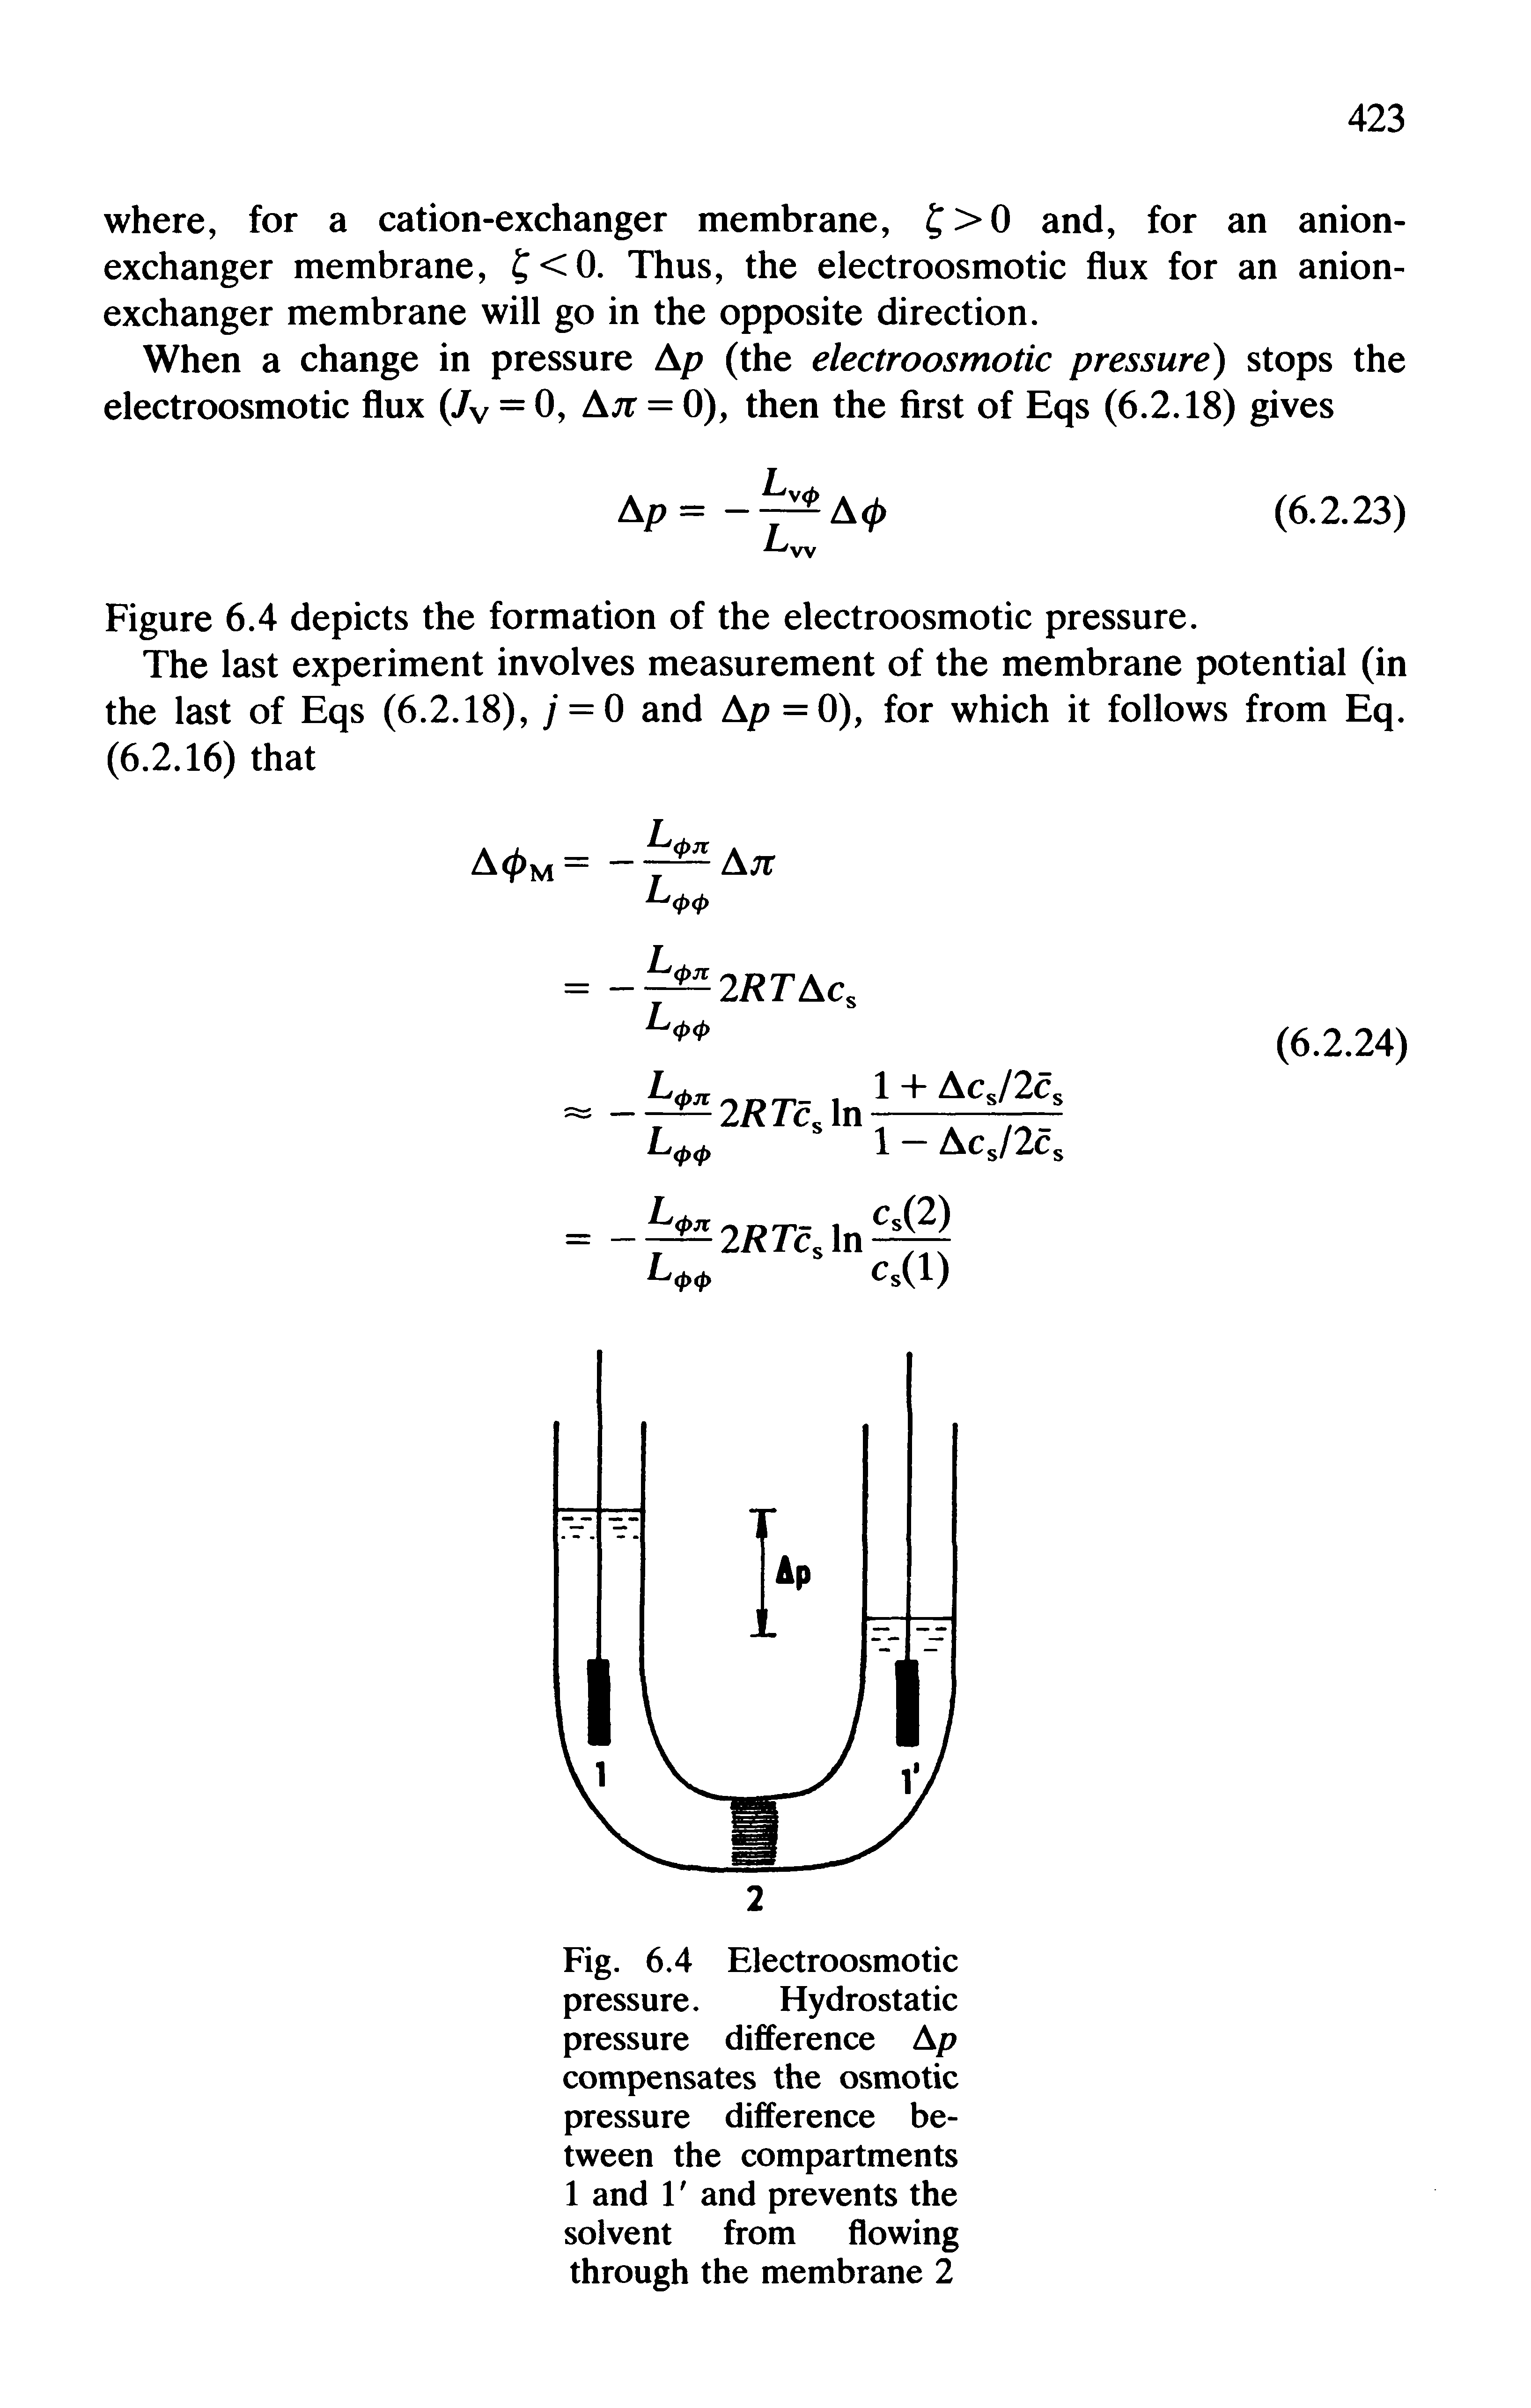 Fig. 6.4 Electroosmotic pressure. Hydrostatic pressure difference Ap compensates the osmotic pressure difference between the compartments 1 and 1 and prevents the solvent from flowing through the membrane 2...